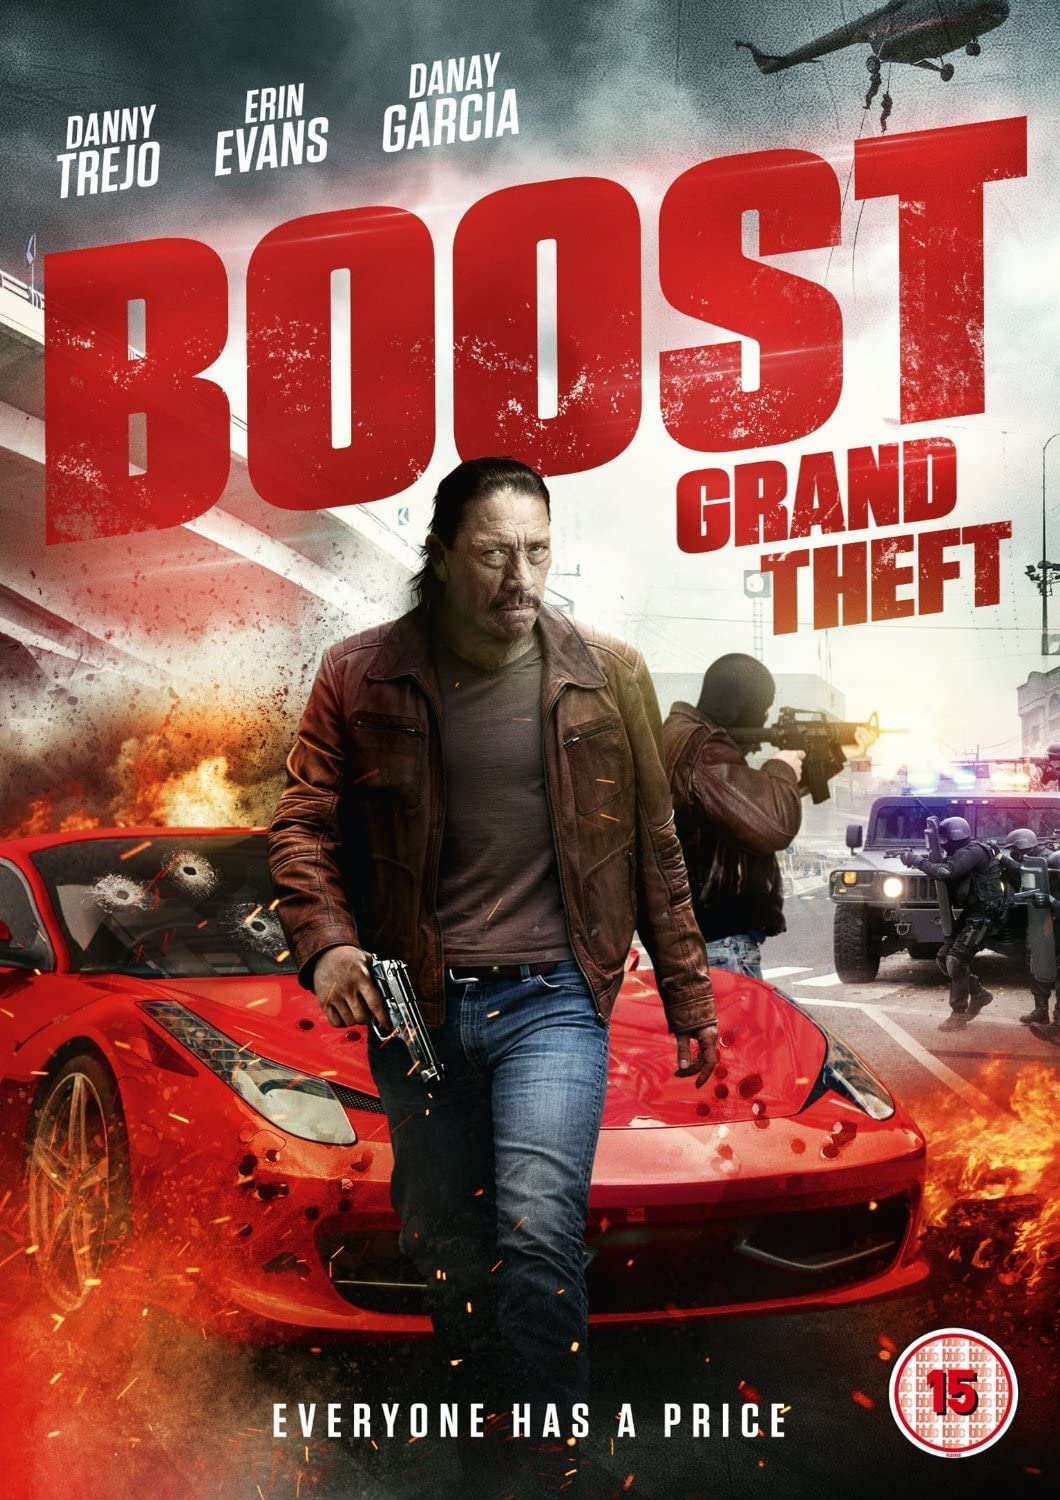 Boost: Grand Theft - Crime/Action [DVD]